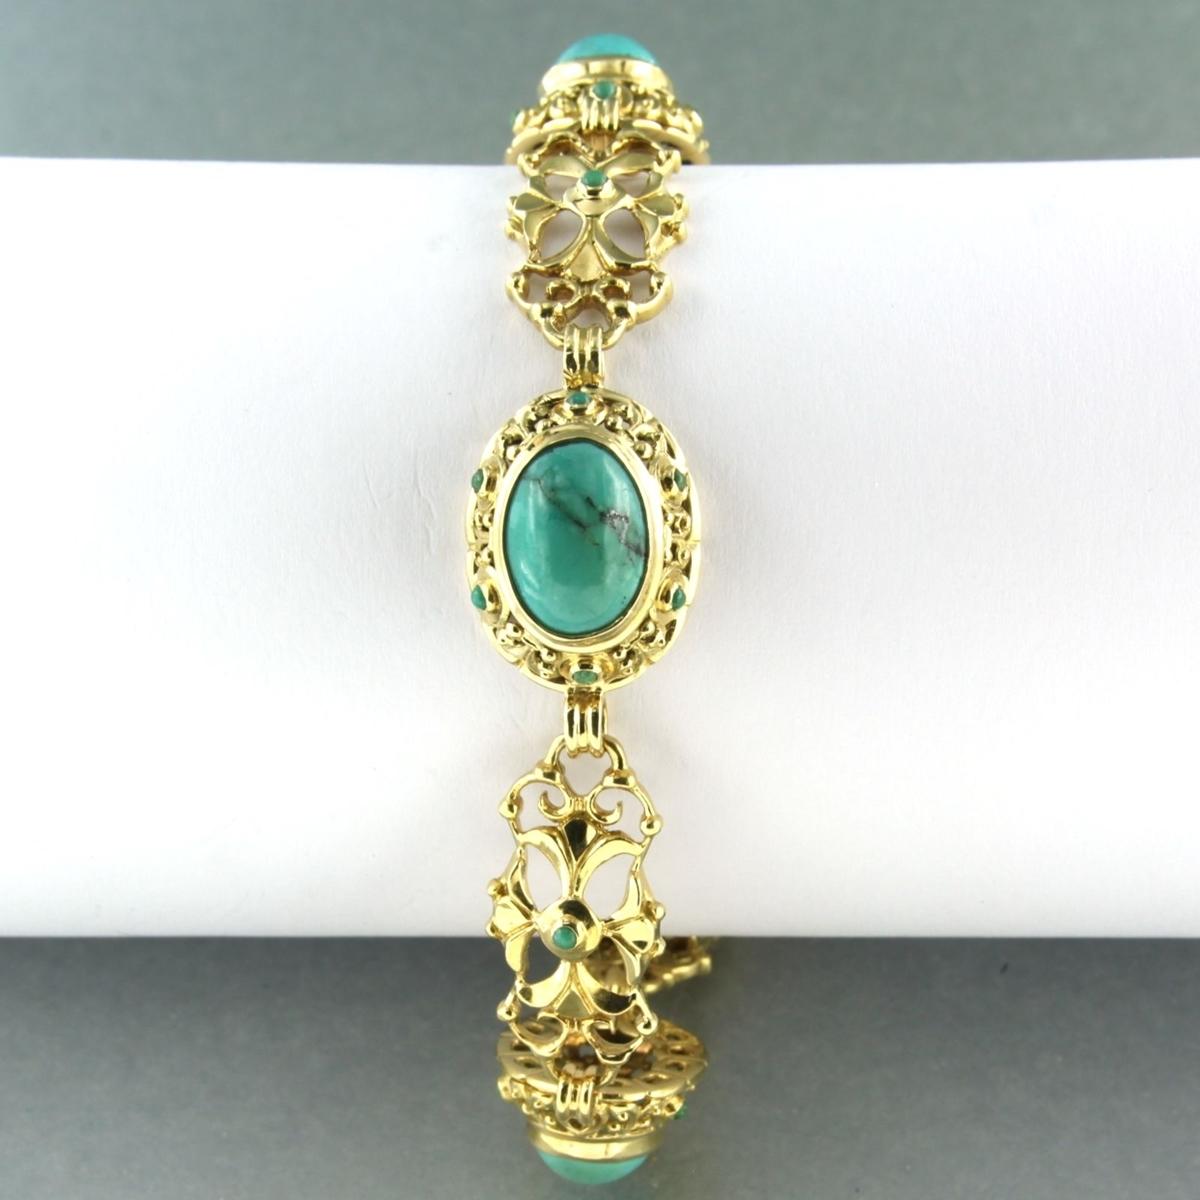 Cabochon 18k yellow gold bracelet set with turquoise - 18 cm long For Sale